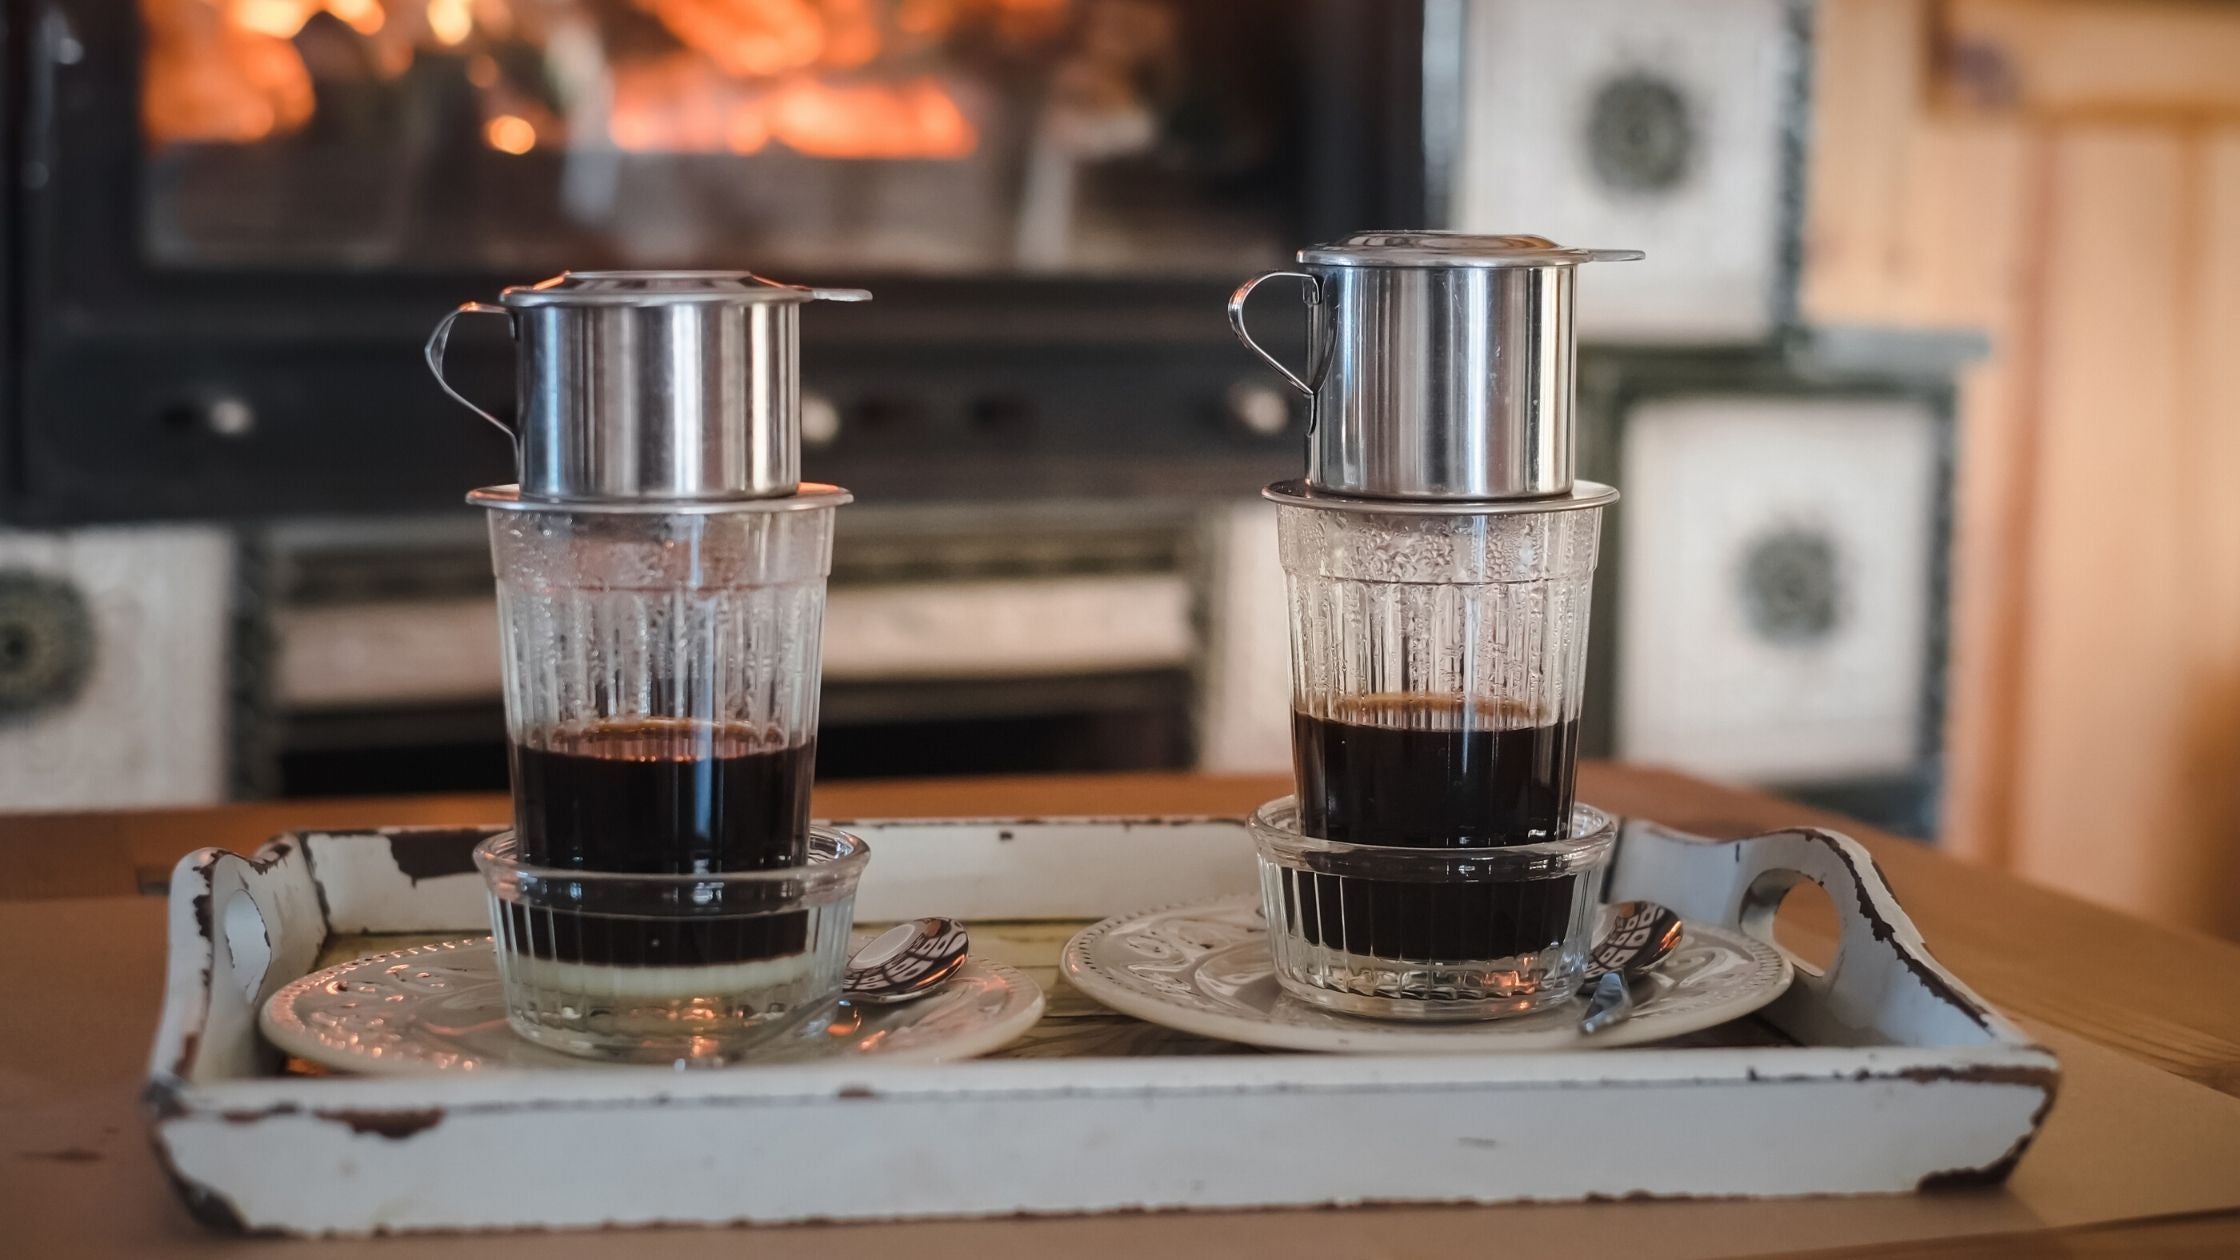 A Guide to Vietnamese Drip Coffee